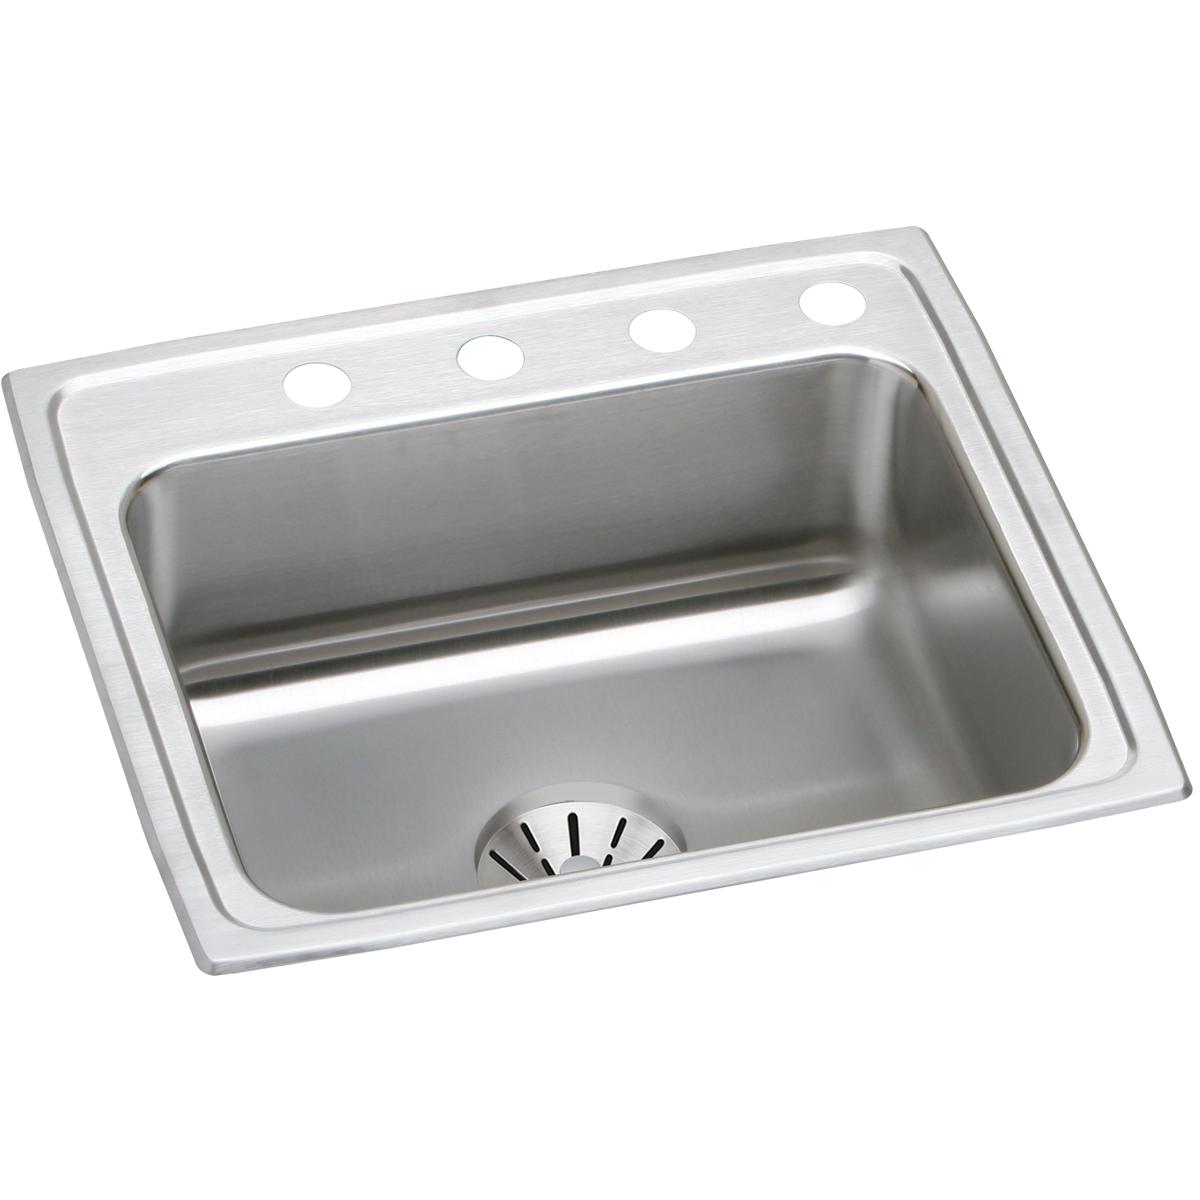 Elkay Lustertone Classic 22" x 19-1/2" x 10-1/8" Single Bowl Stainless Steel Drop-in Sink with Perfect Drain